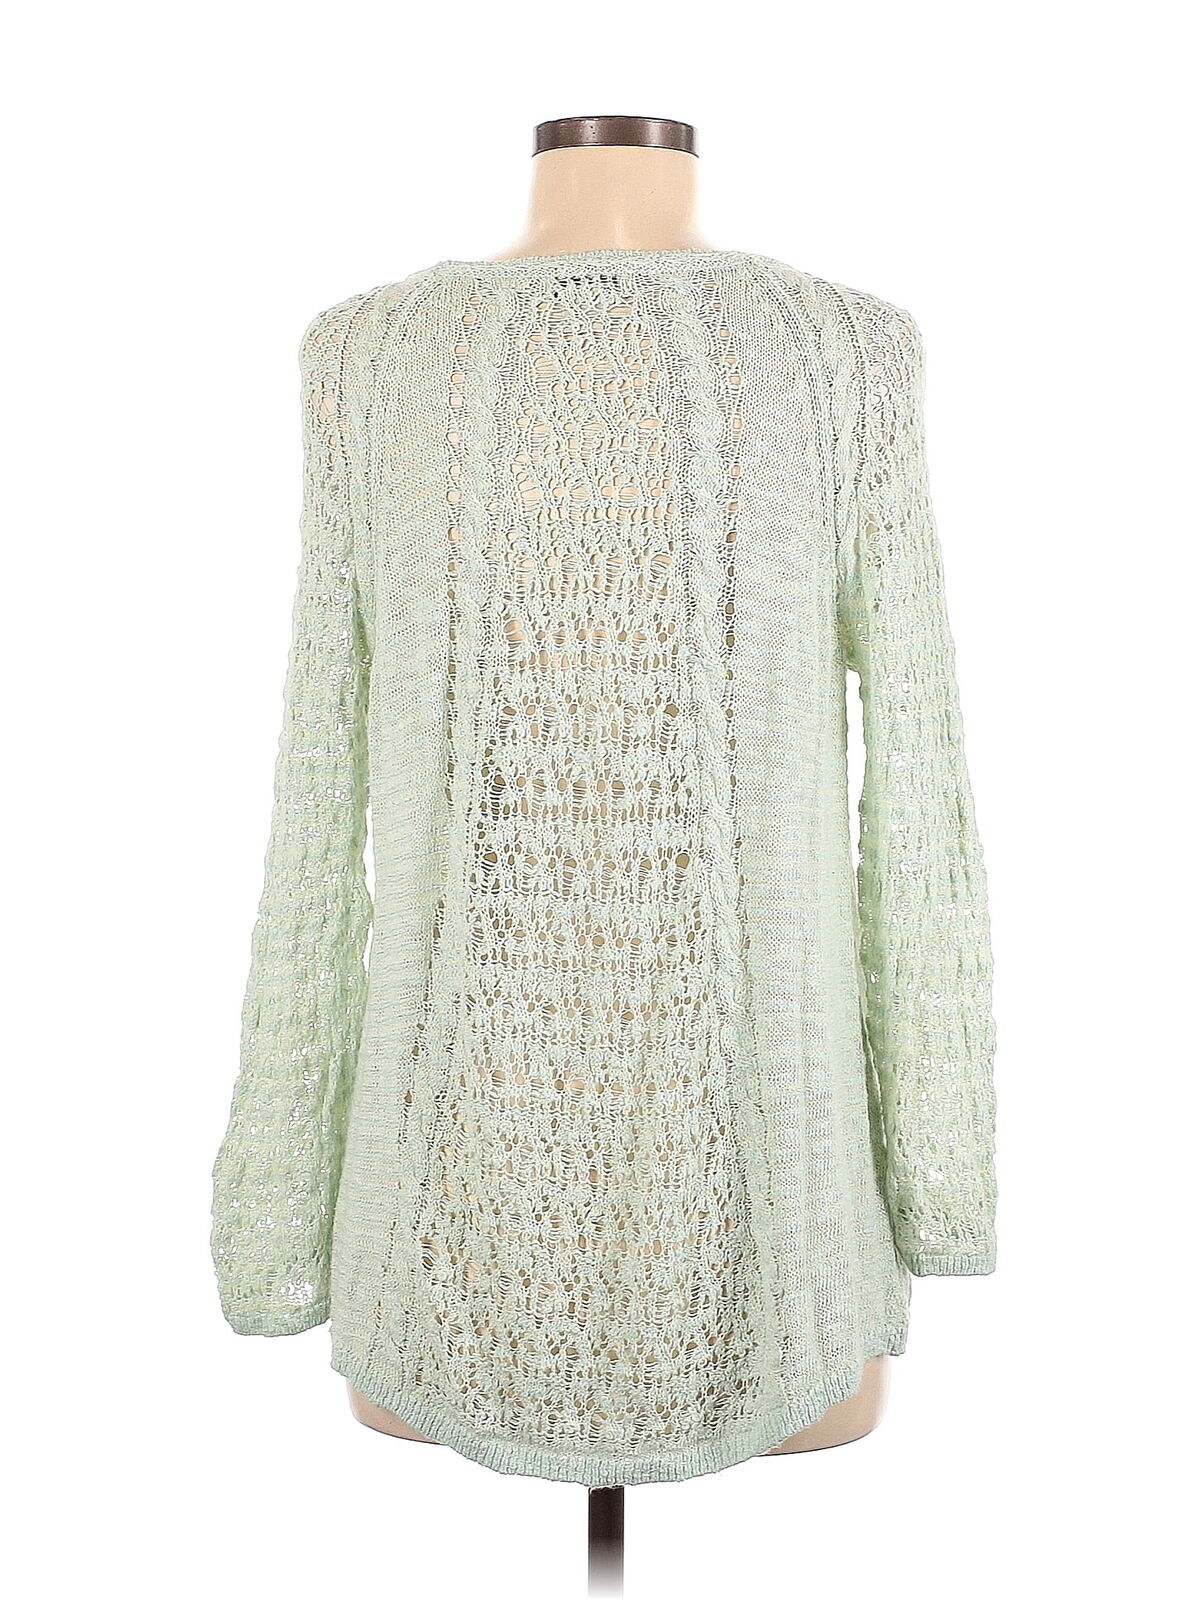 Lucky Brand Women Green Pullover Sweater M - image 2